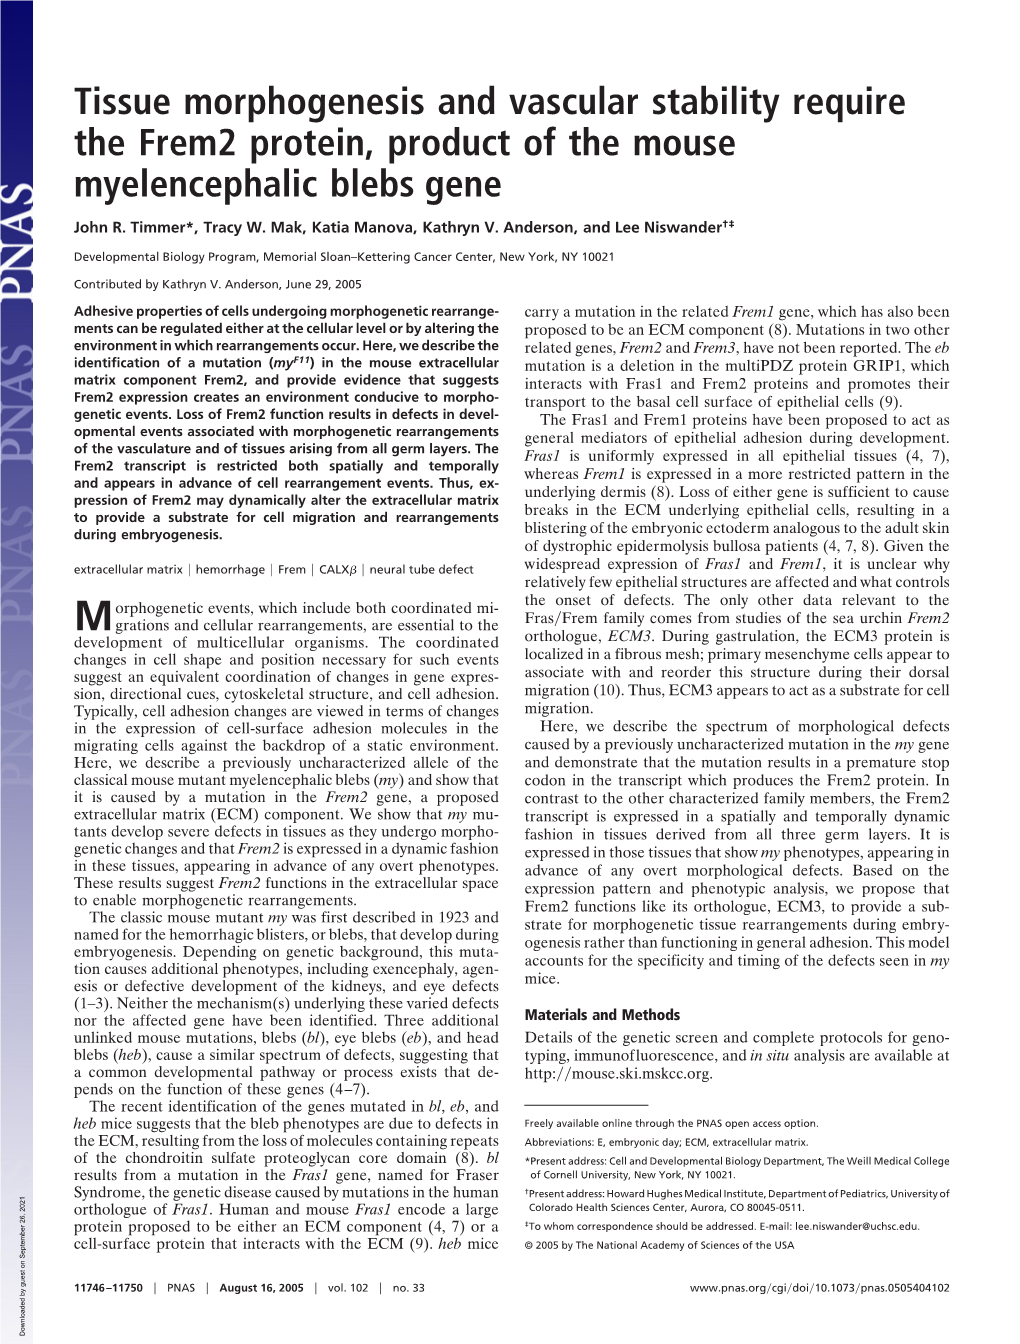 Tissue Morphogenesis and Vascular Stability Require the Frem2 Protein, Product of the Mouse Myelencephalic Blebs Gene